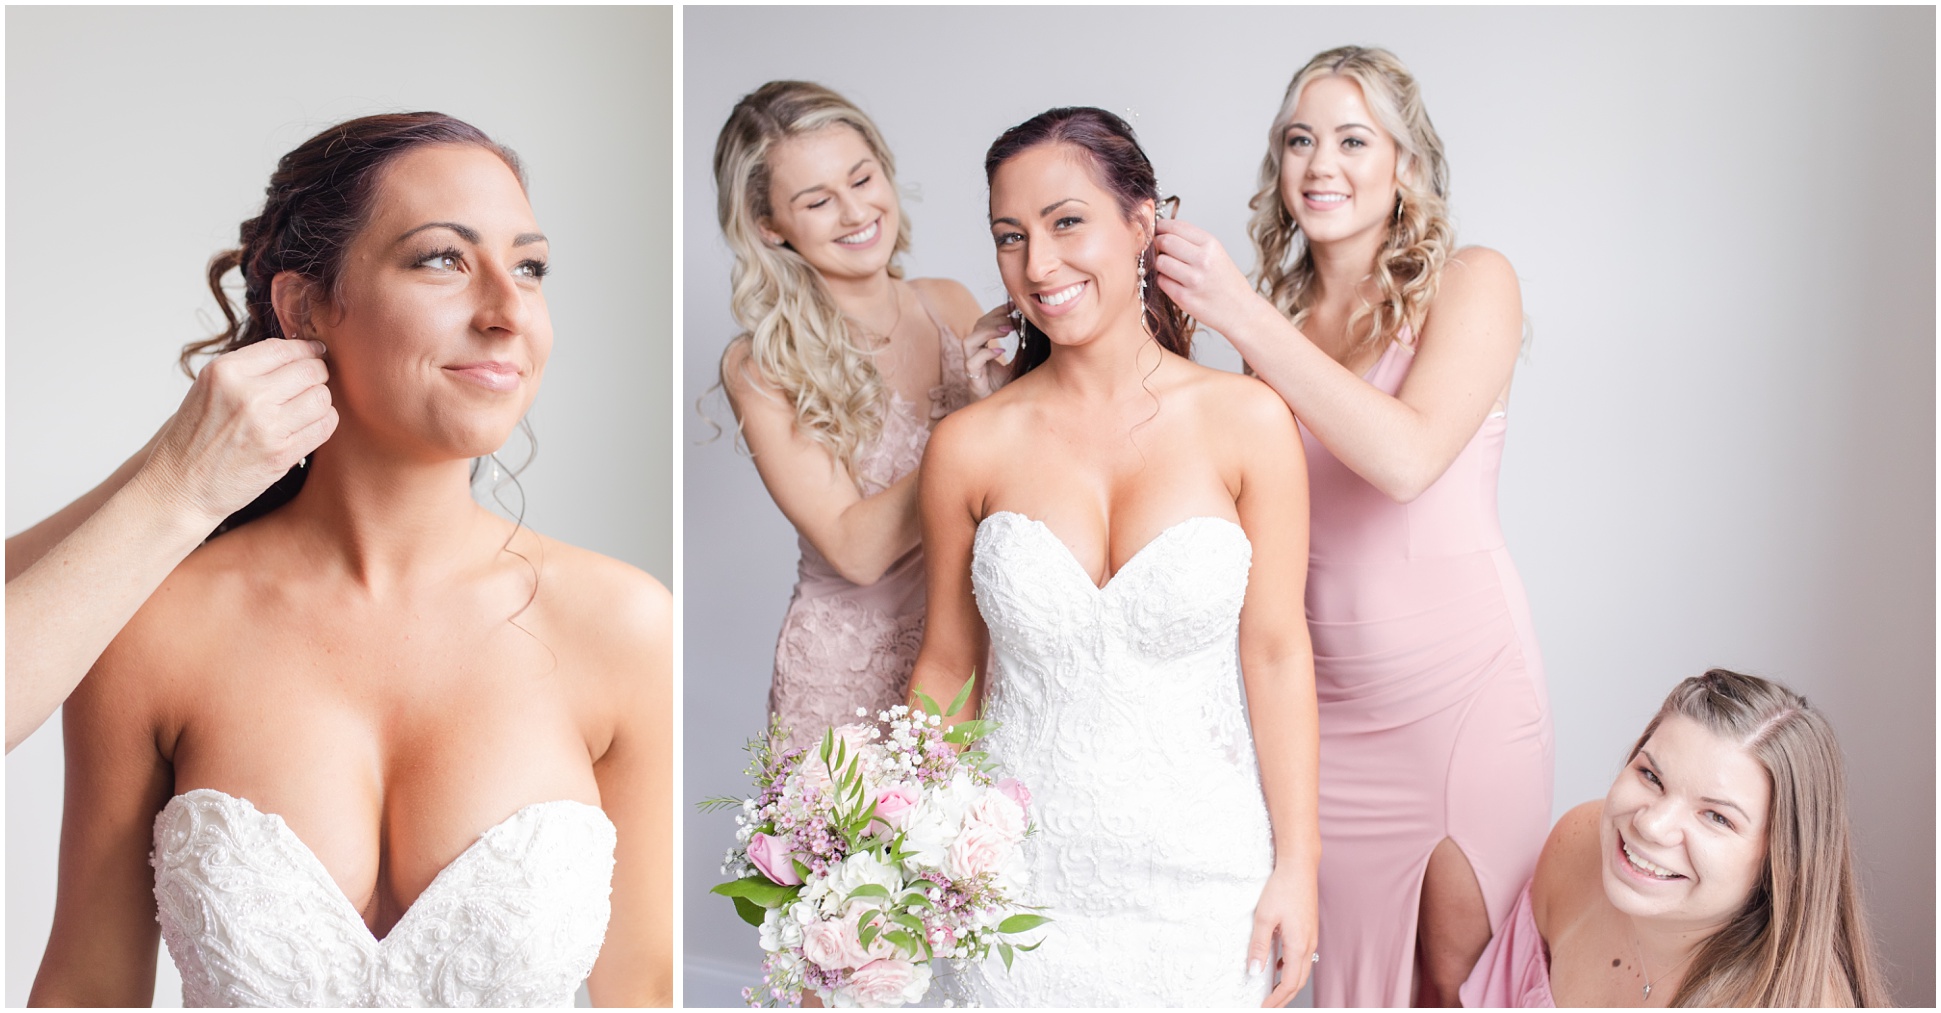 The bridesmaids in a variety of pink dresses helping the bride get ready